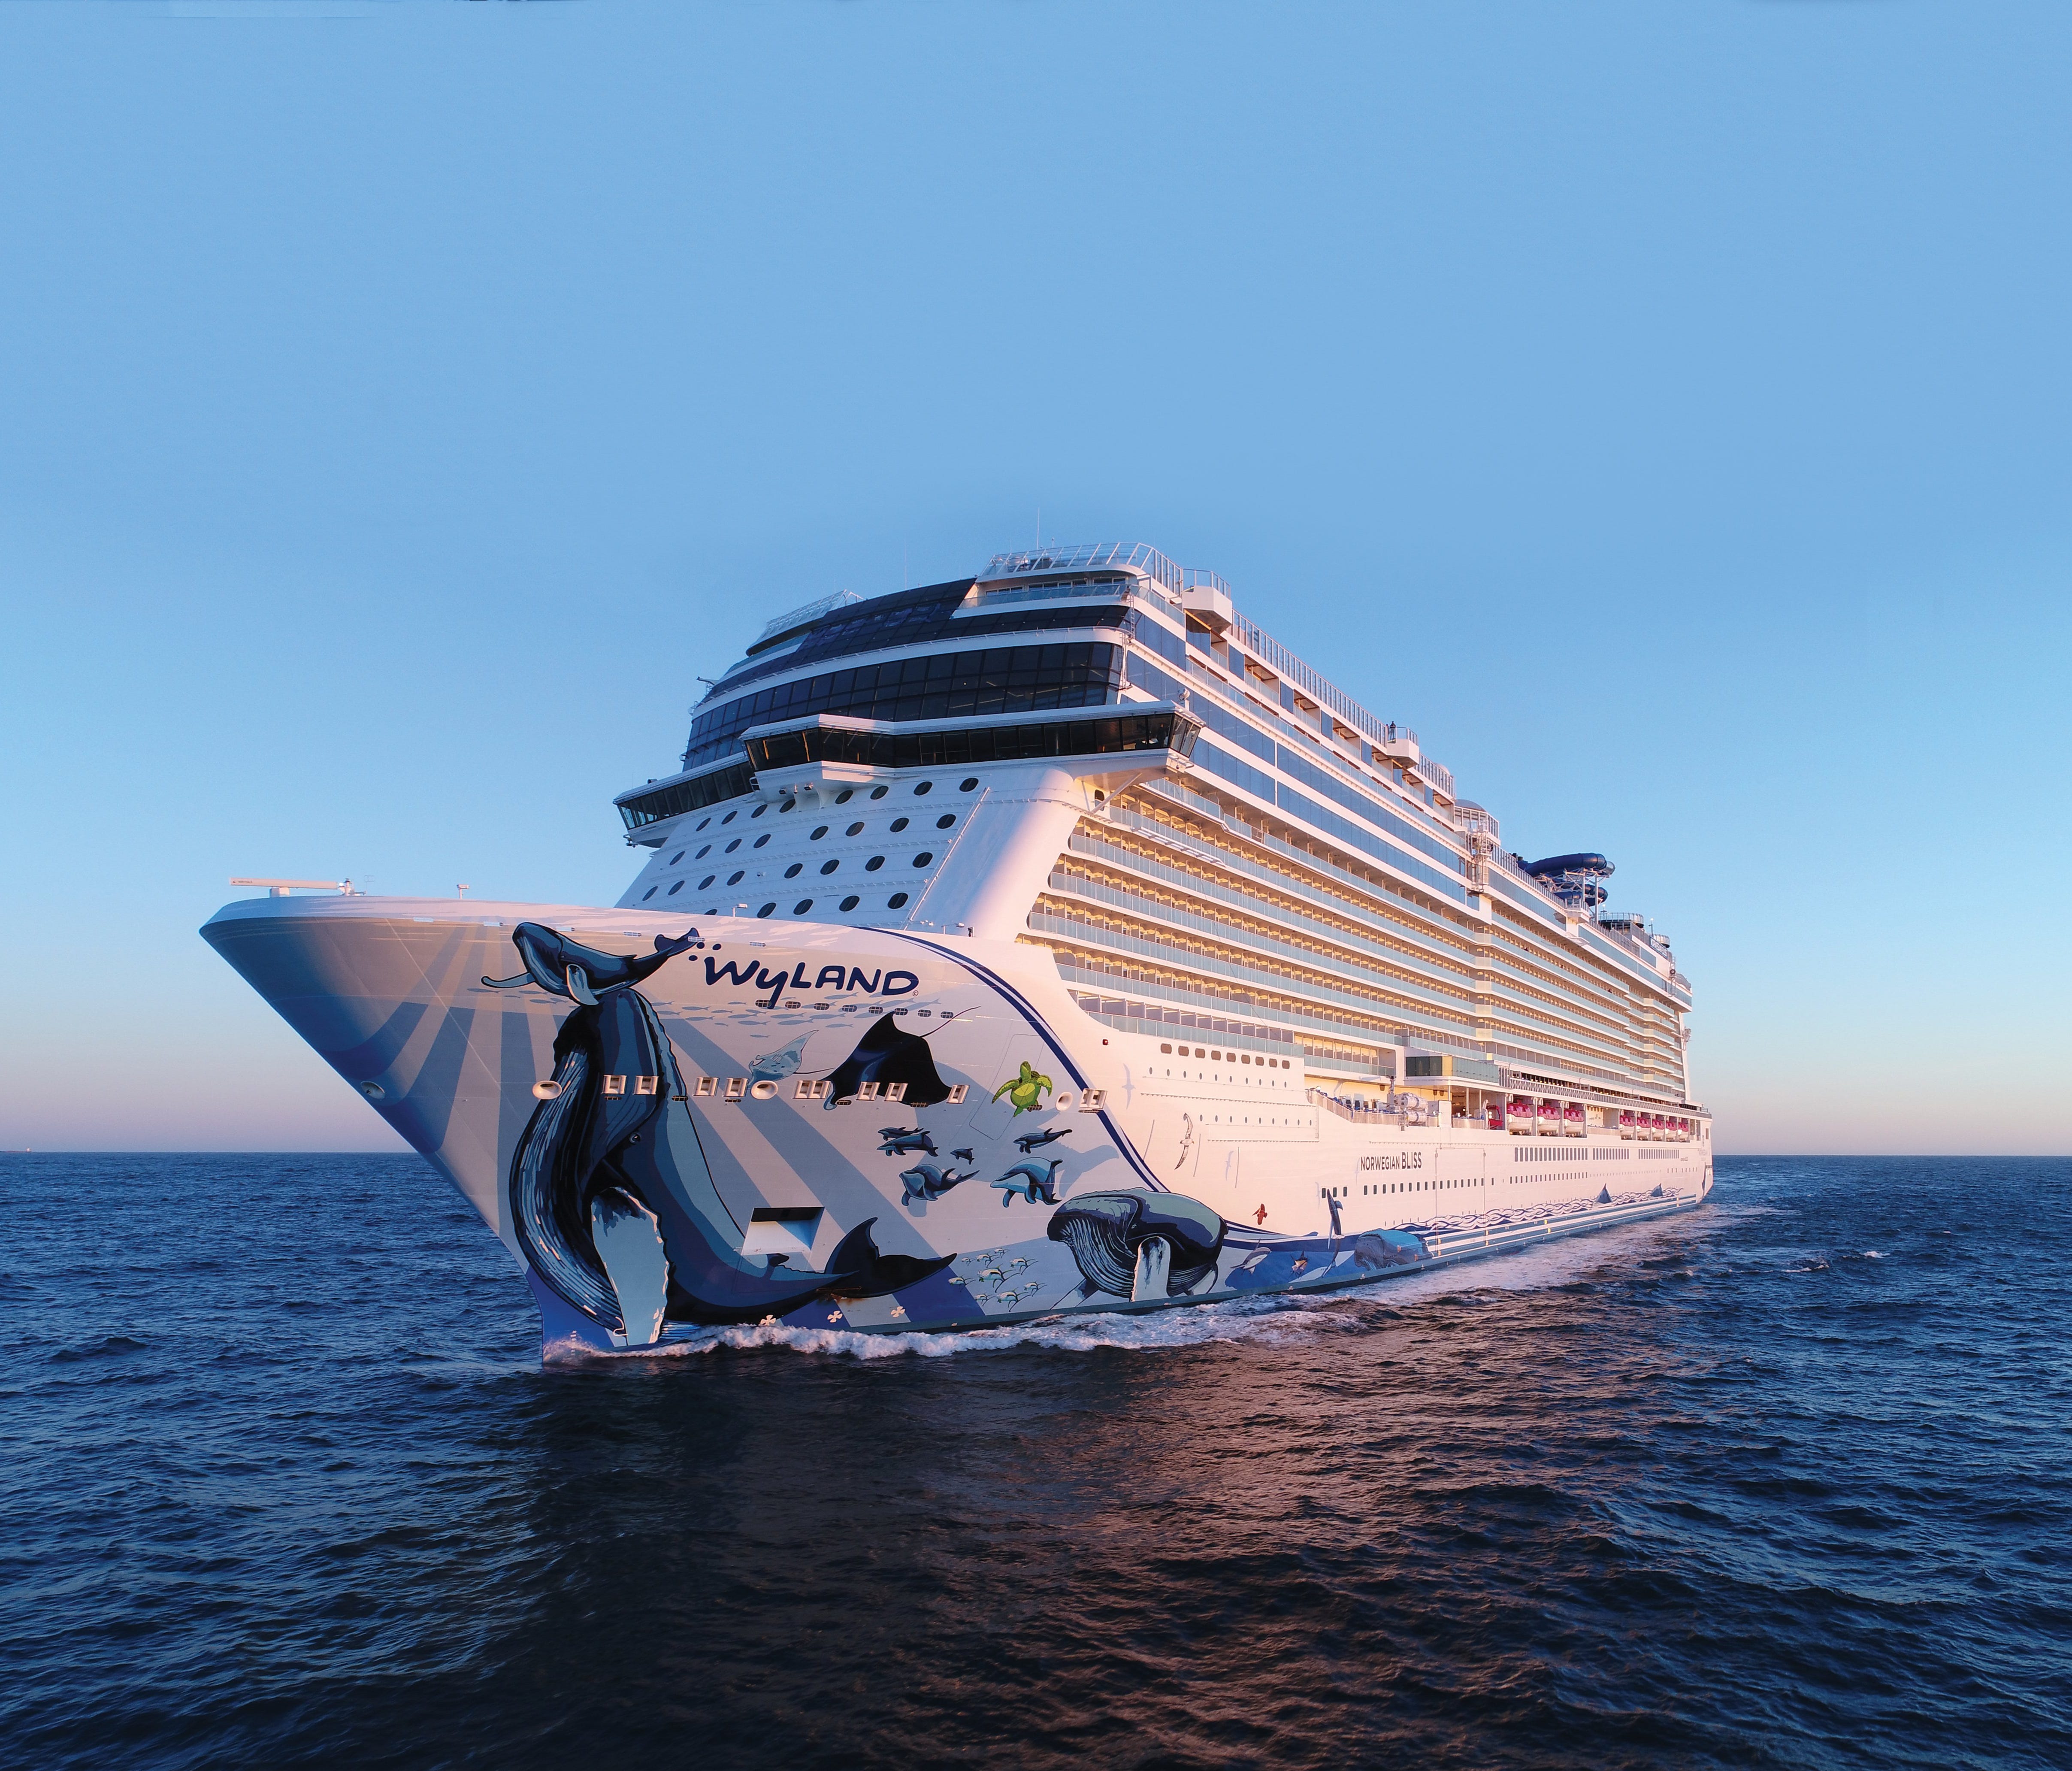 9. Norwegian Bliss. Unveiled in April 2018, Norwegian Cruise Line's largest ship ever measures 168,028 tons.